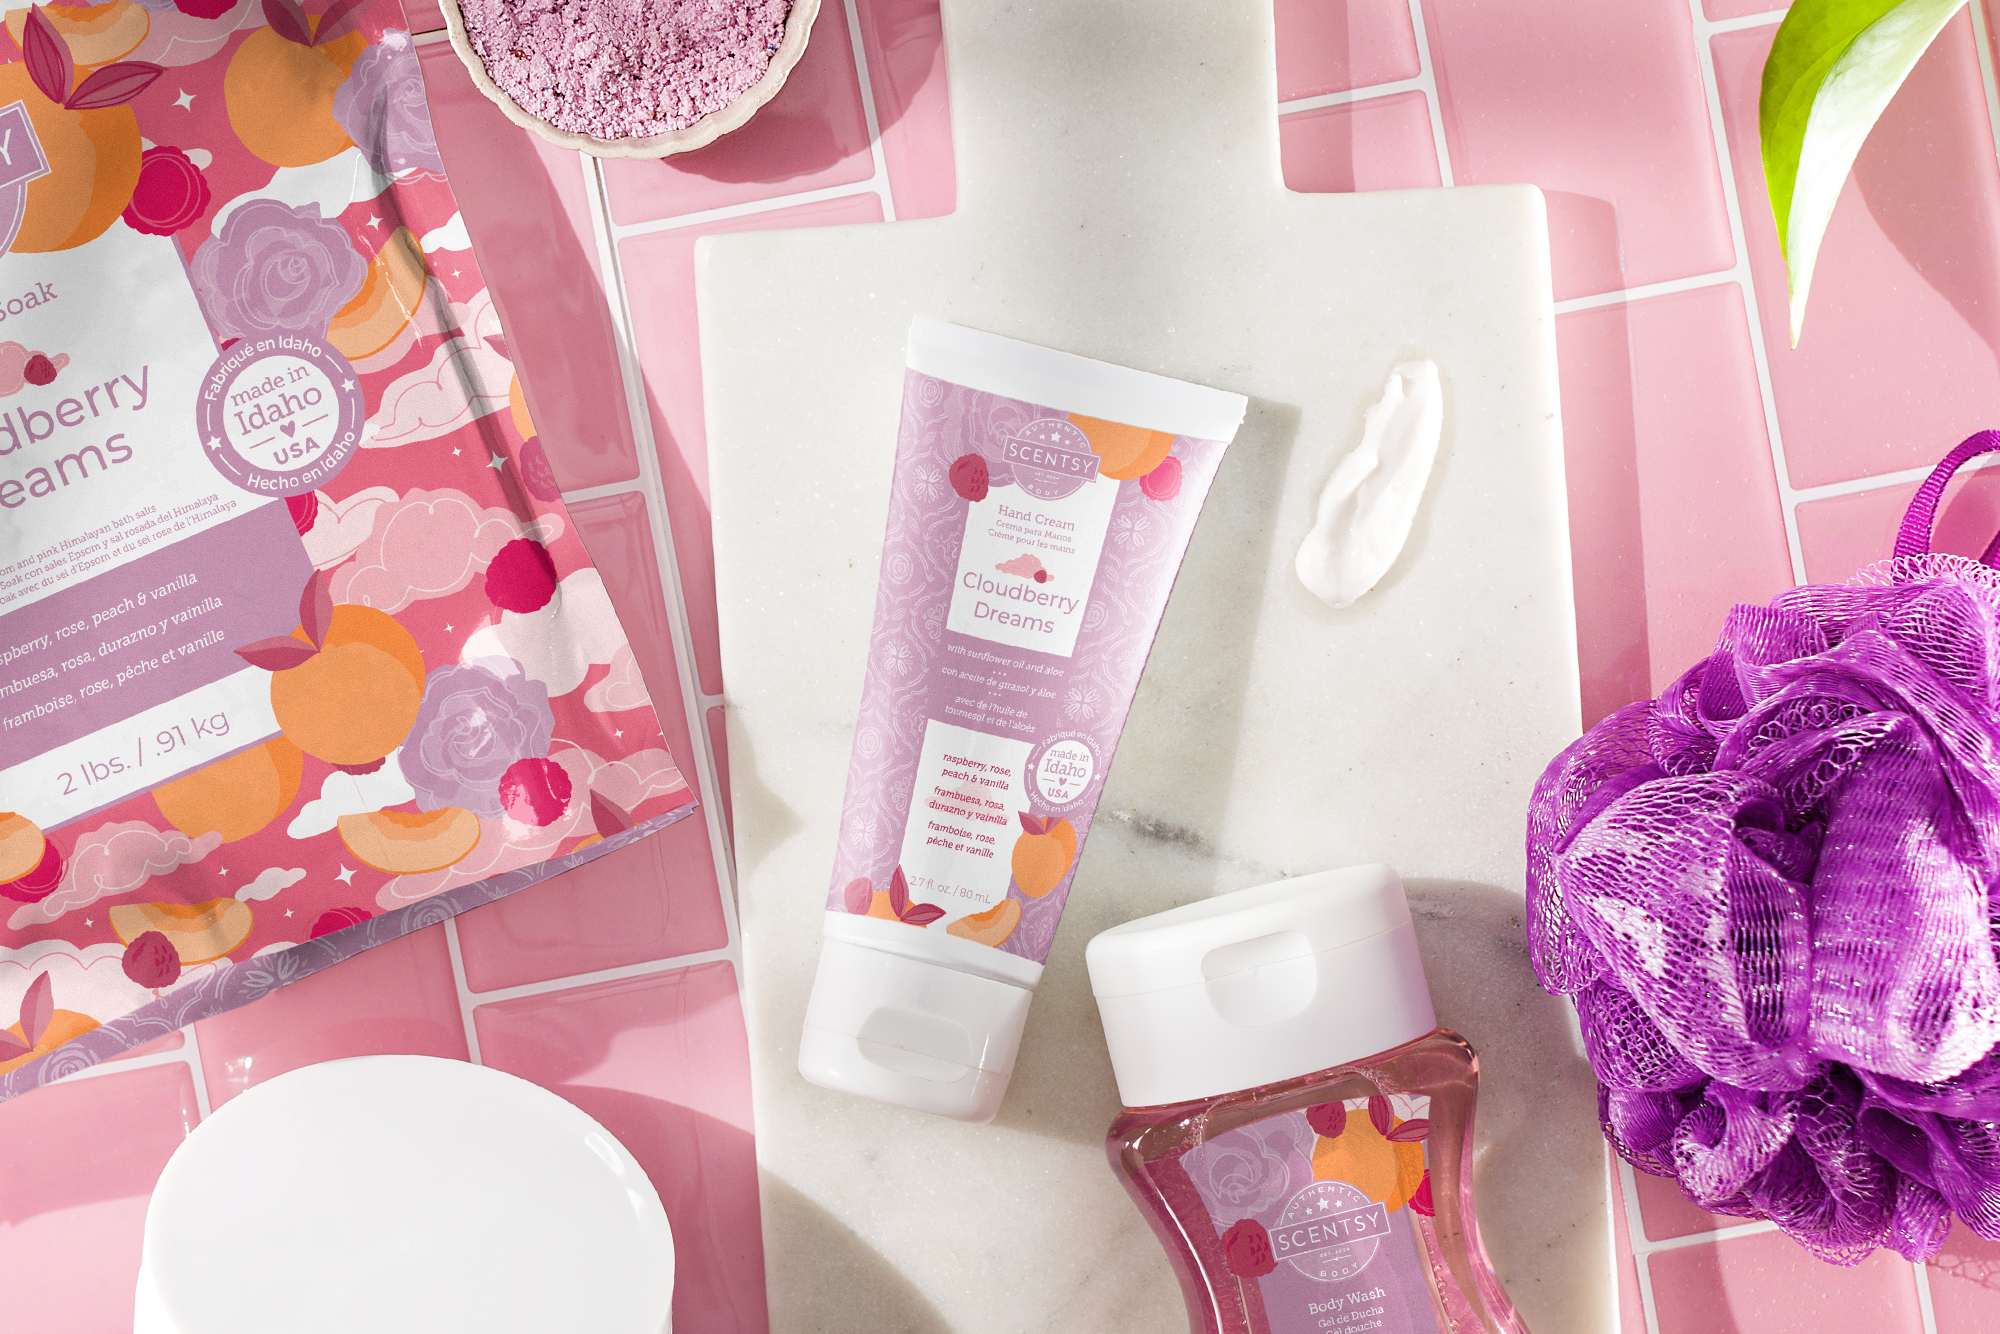 Scentsy Soak, Hand Cream and Body Wash scented in one of our favorite fragrances, Cloudberry Dreams!